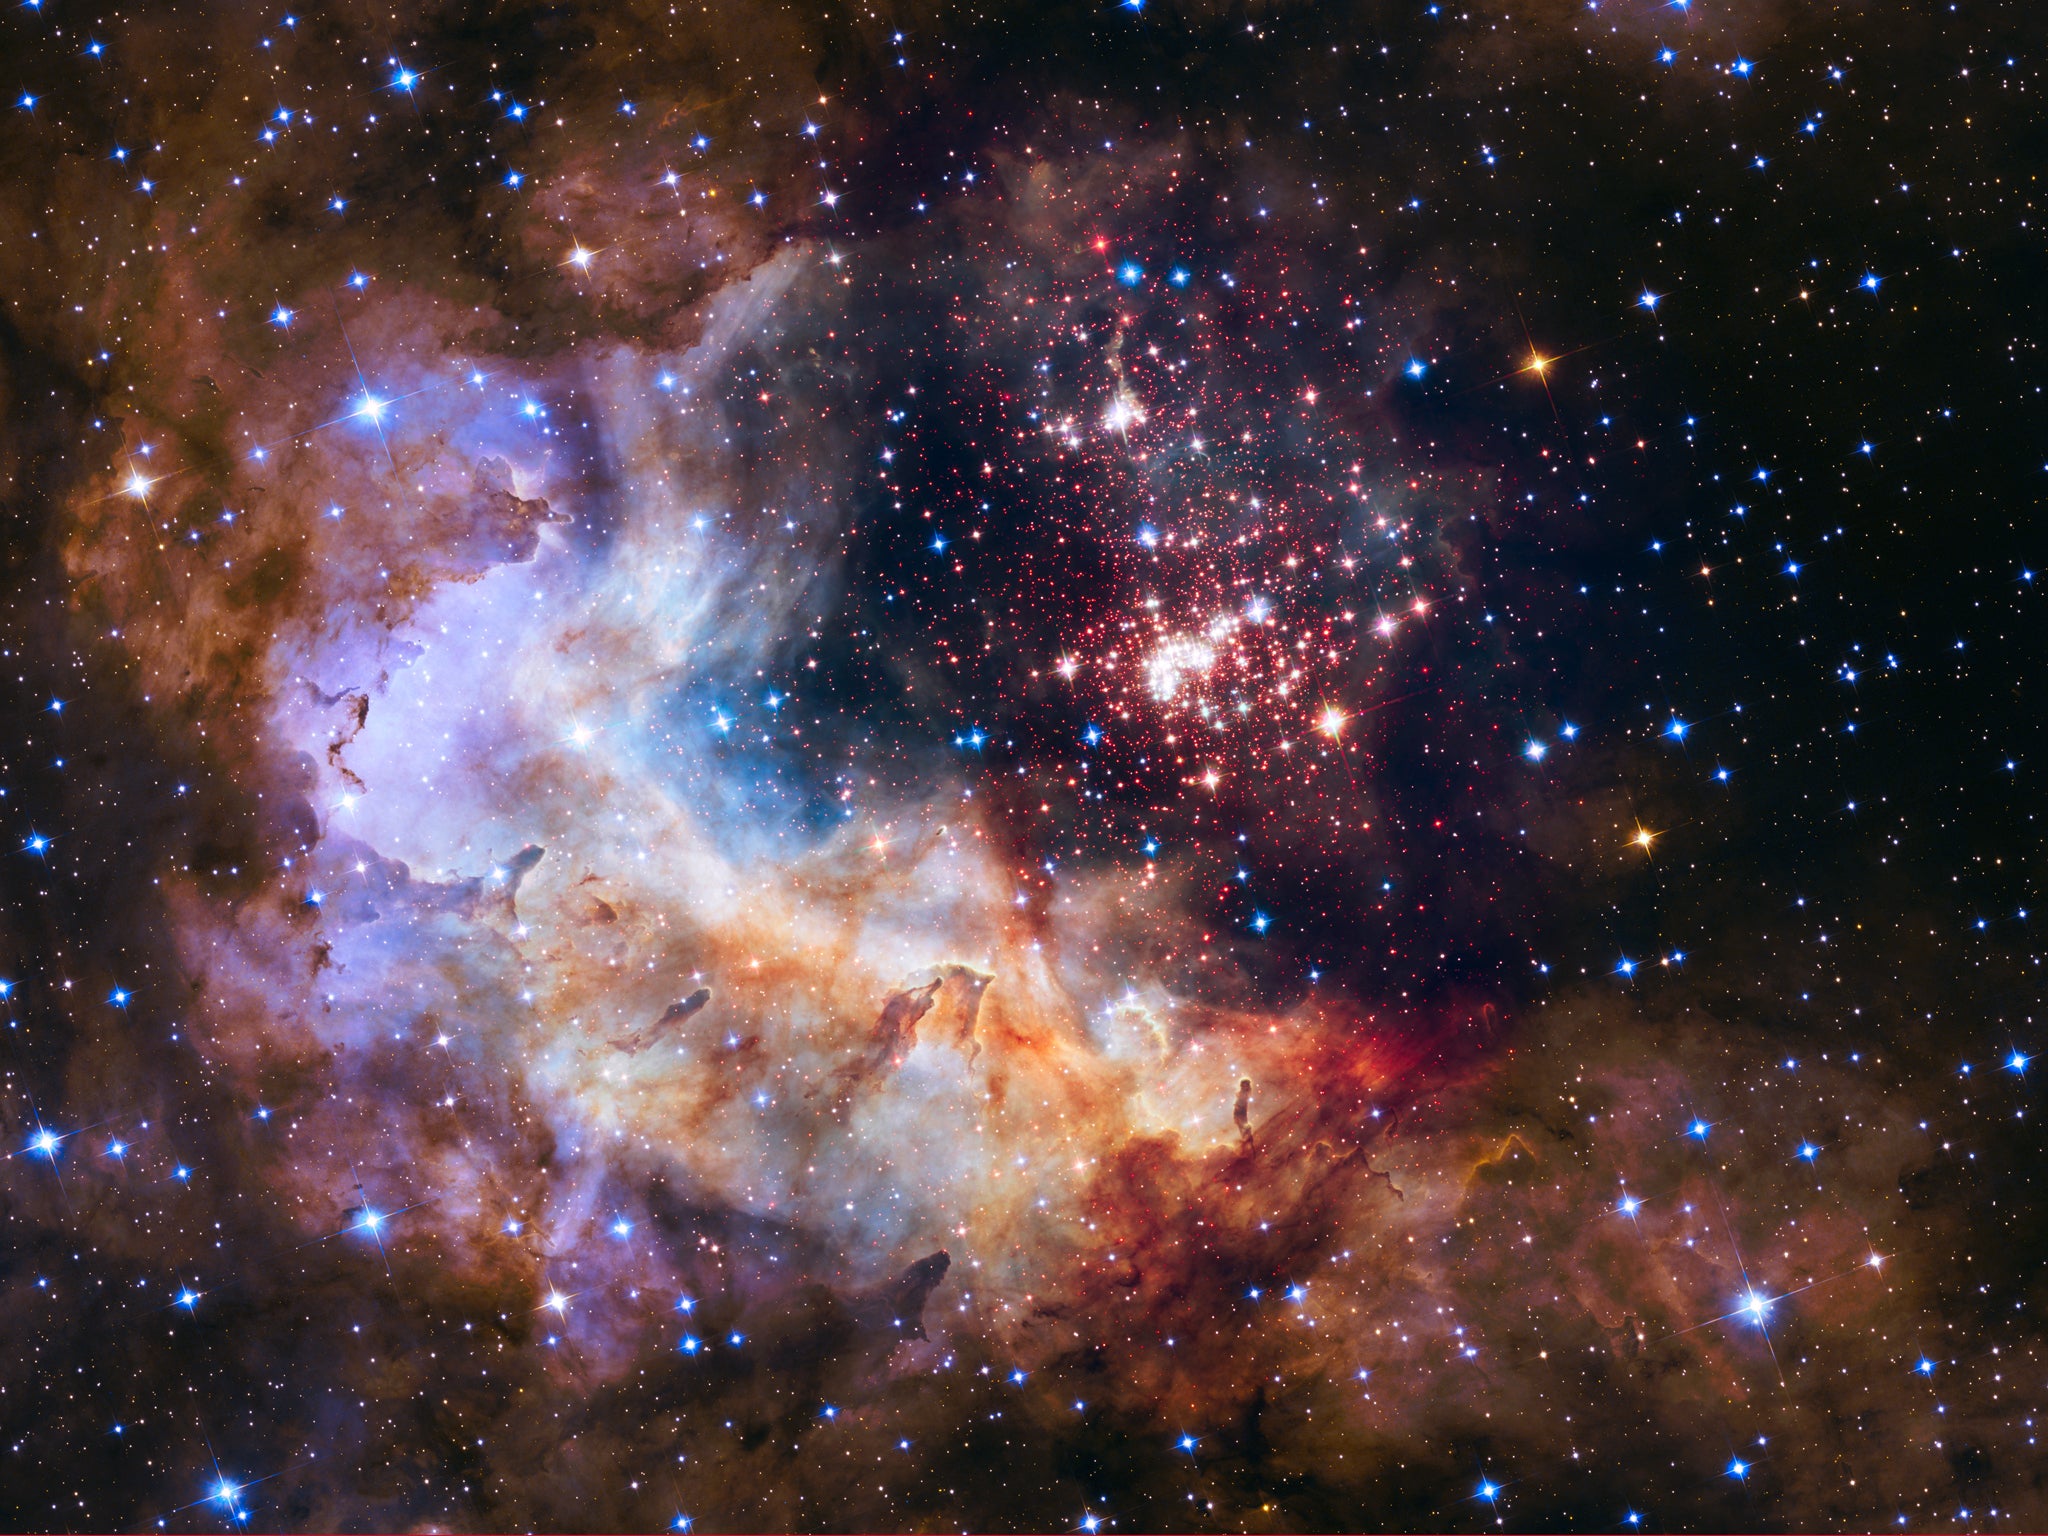 This glittering tapestry of young stars flaring into life in the star cluster Westerlund 2 has been released to celebrate the NASA/ESA Hubble Space Telescope’s 25th year in orbit and a quarter of a century of discoveries, stunning images and outstanding s